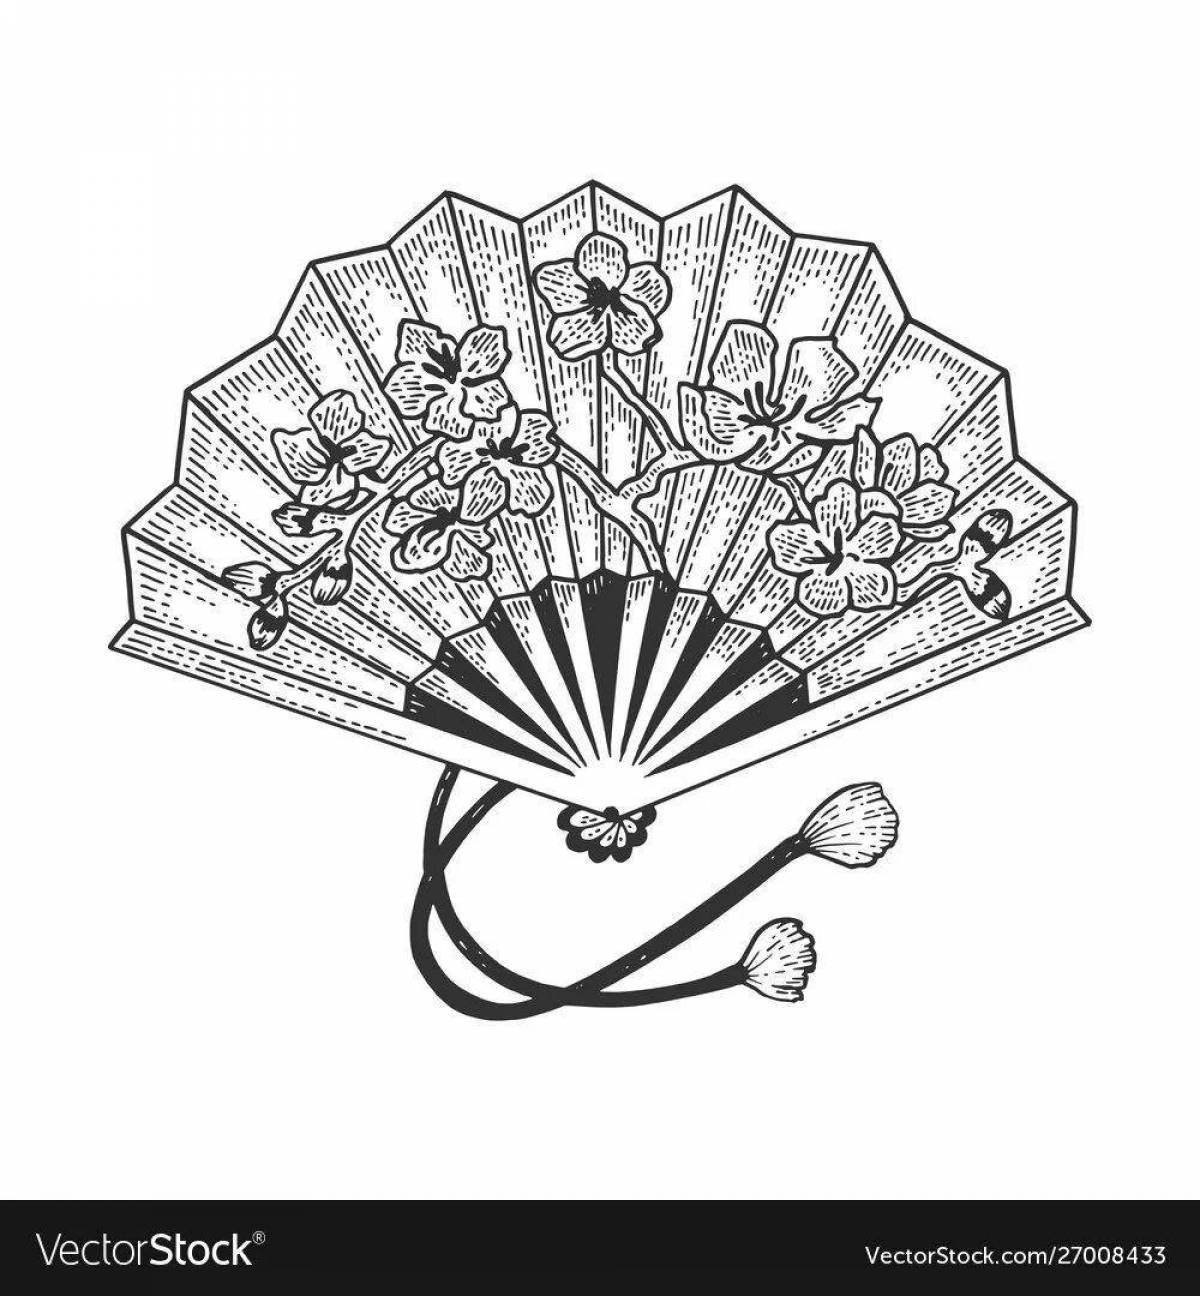 Chinese fan glowing coloring page